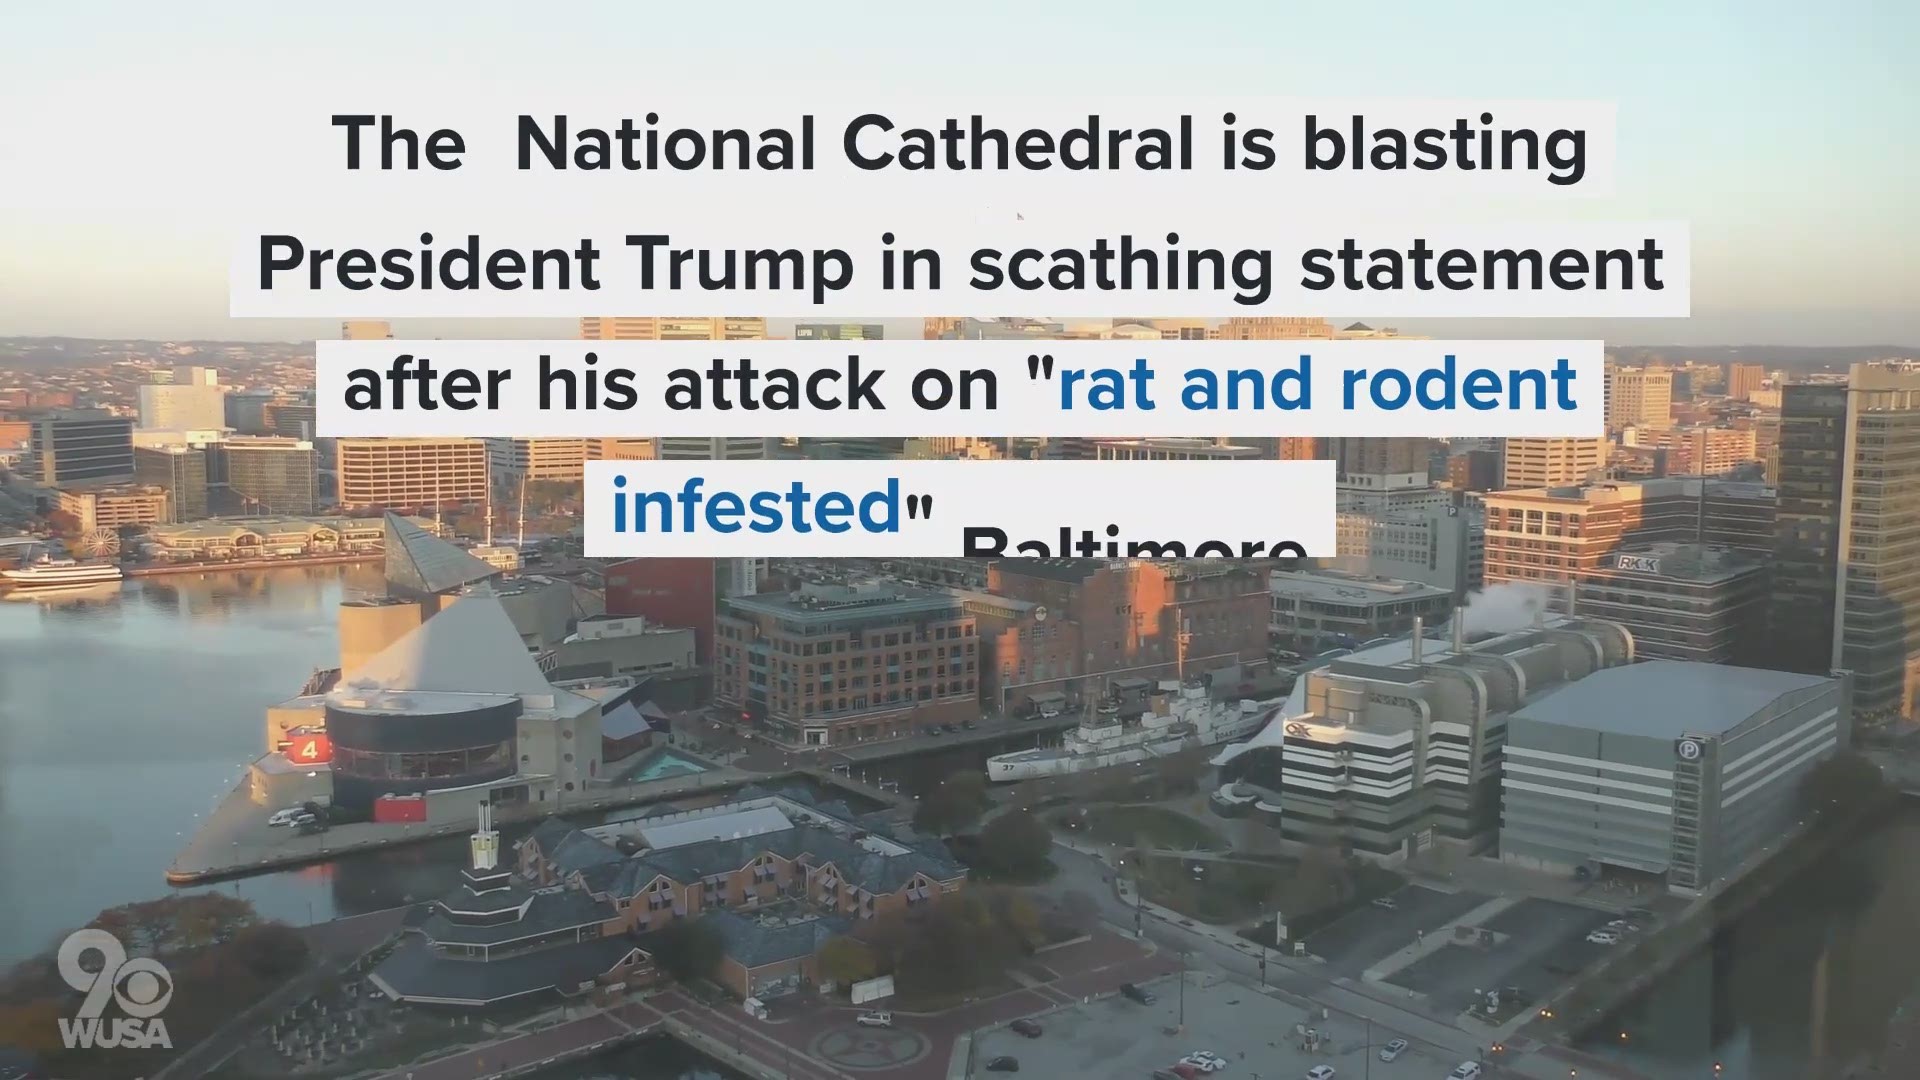 Tuesday afternoon, the National Cathedral in Washington D.C. issued a statement that can only be categorized as a scathing review of President Donald Trump.